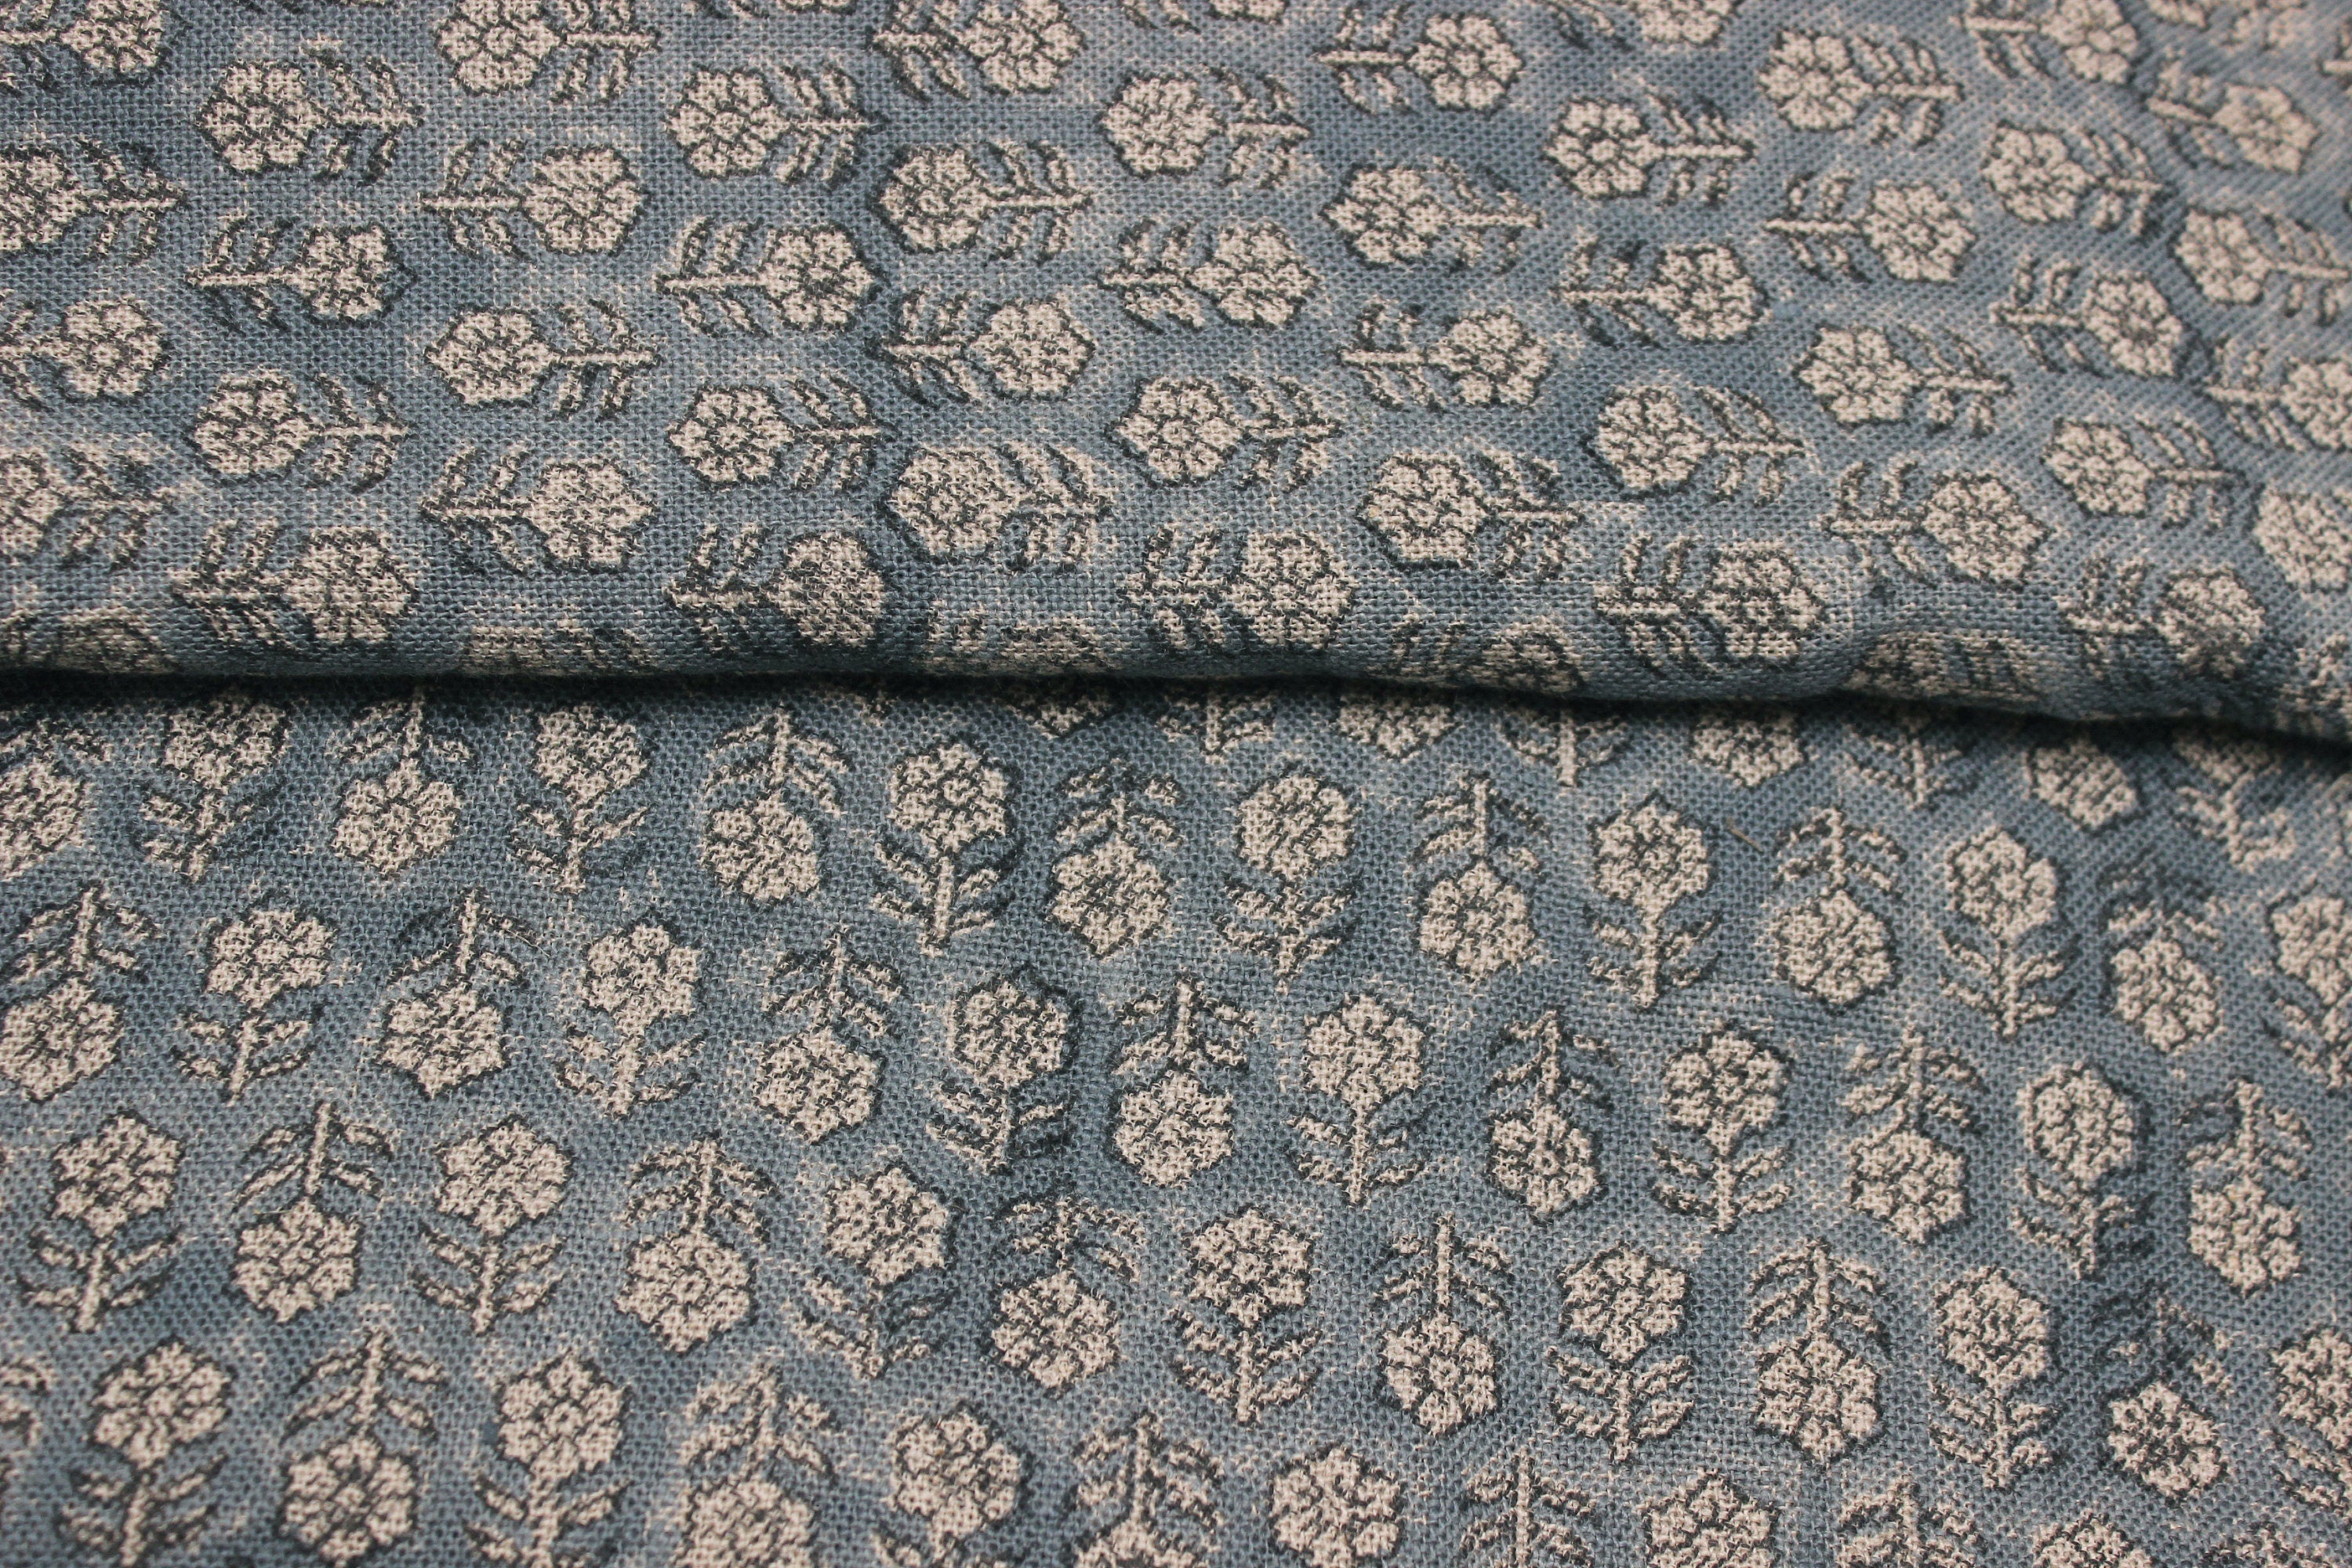 Block Print Linen Fabric, Tulsi Buti Floral  Thick Handloom Linen, Most Popular Indian Block Print For Pillow Cases, Upholstery And Thanksgiving Decor